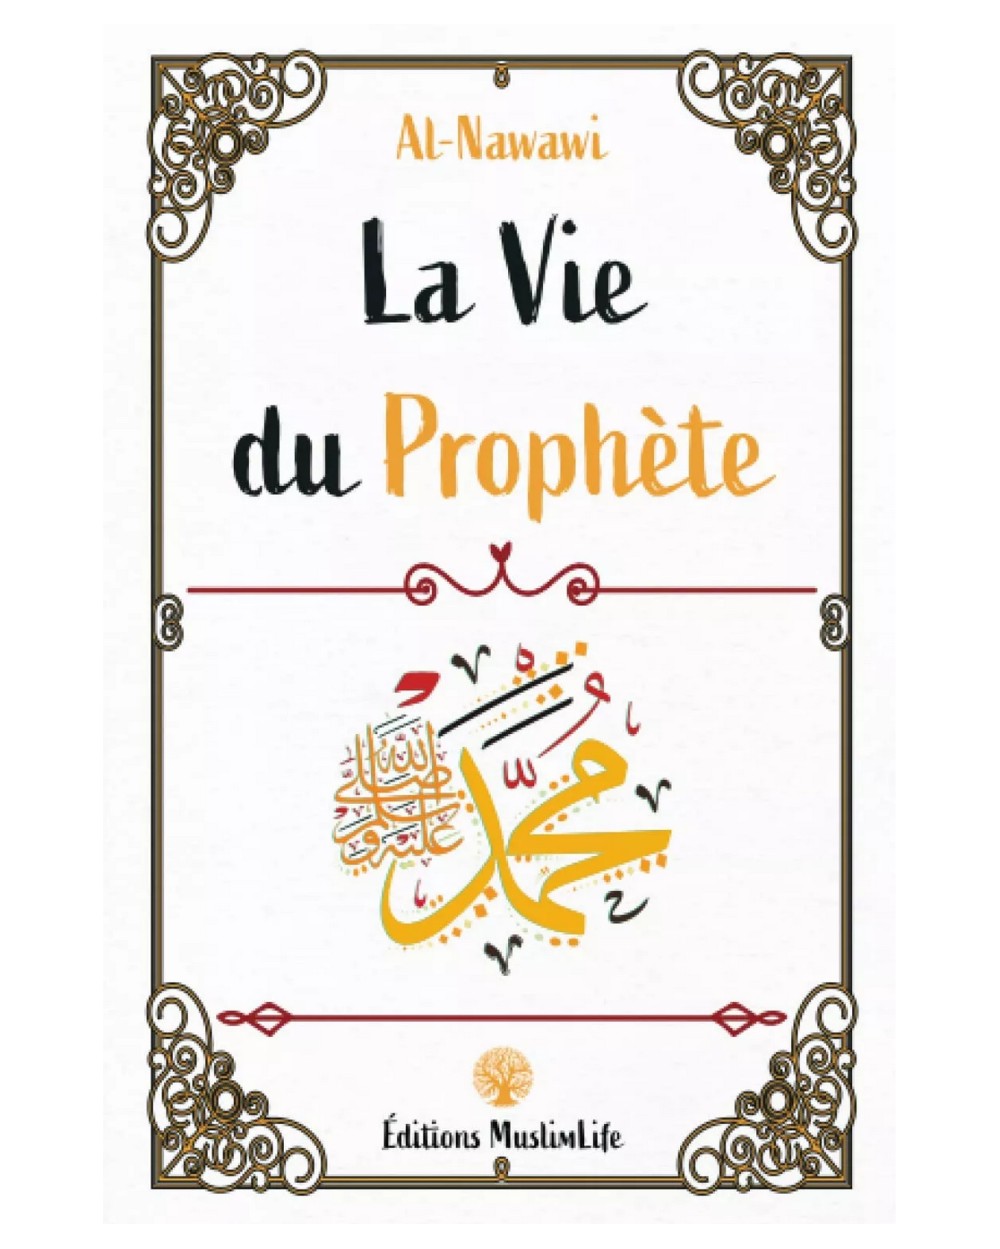 The life of the prophet - Al Nawawi - Muslimlife Edition